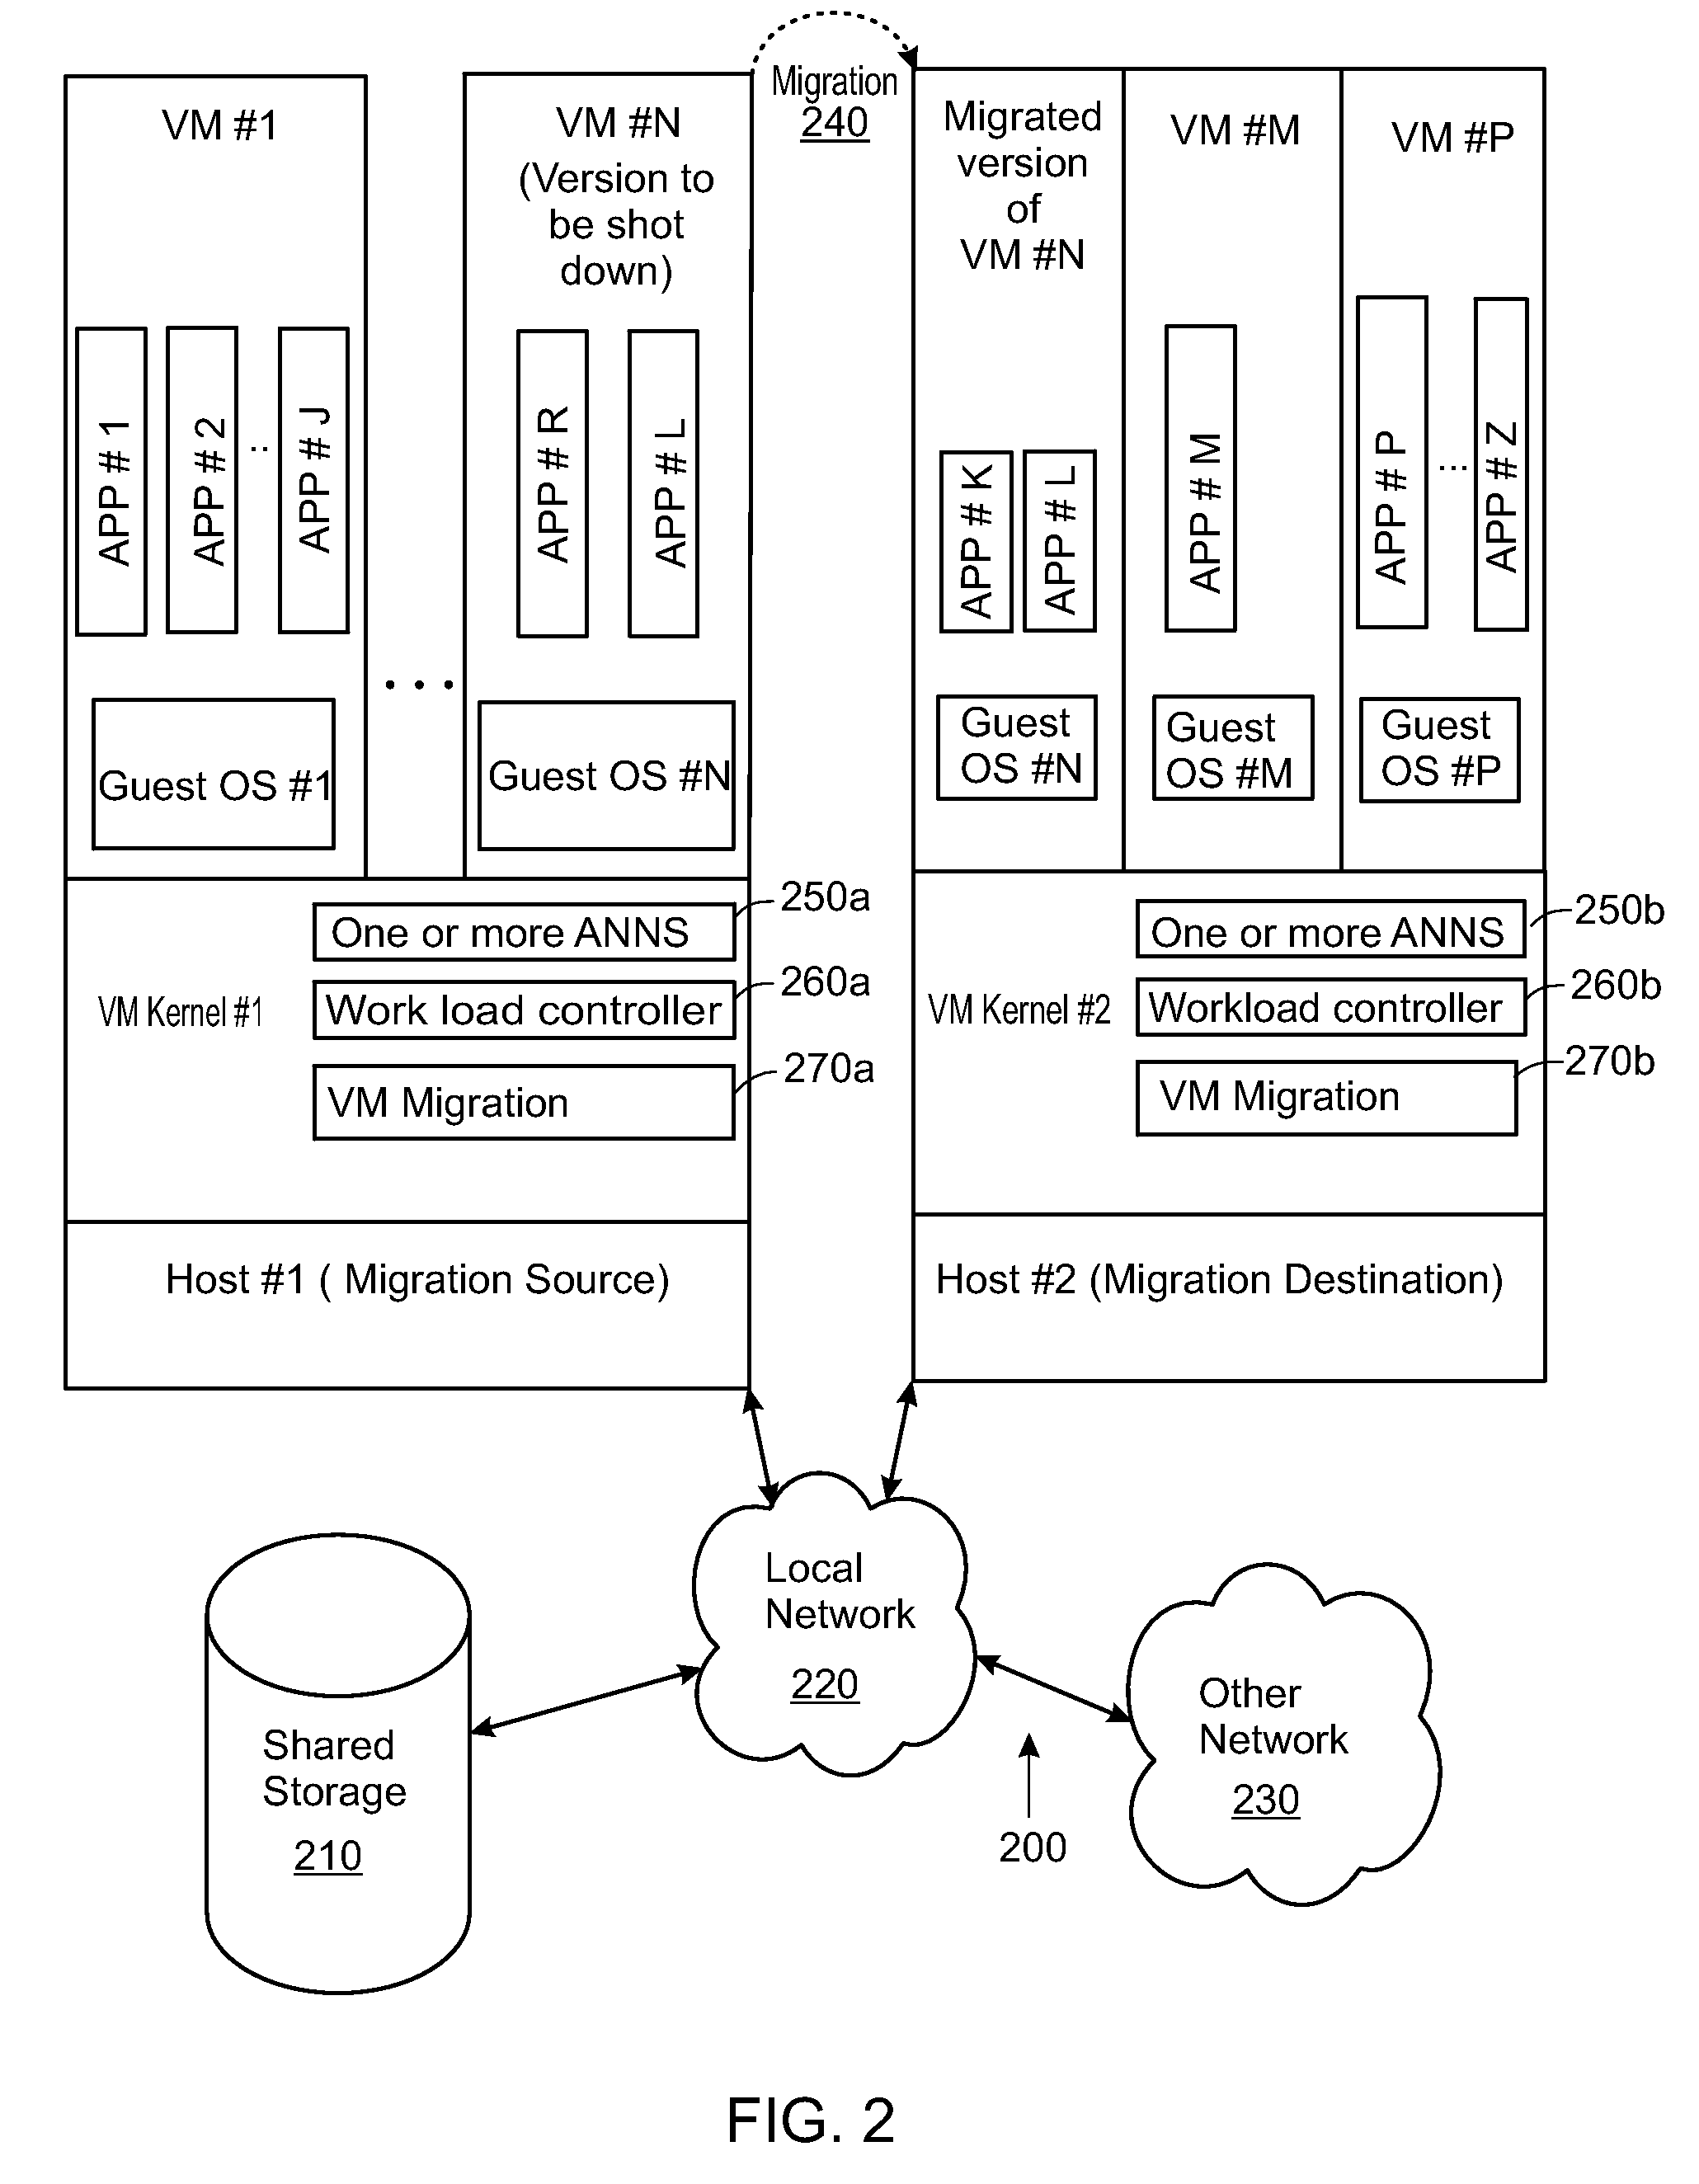 Artificial neural network for balancing workload by migrating computing tasks across hosts